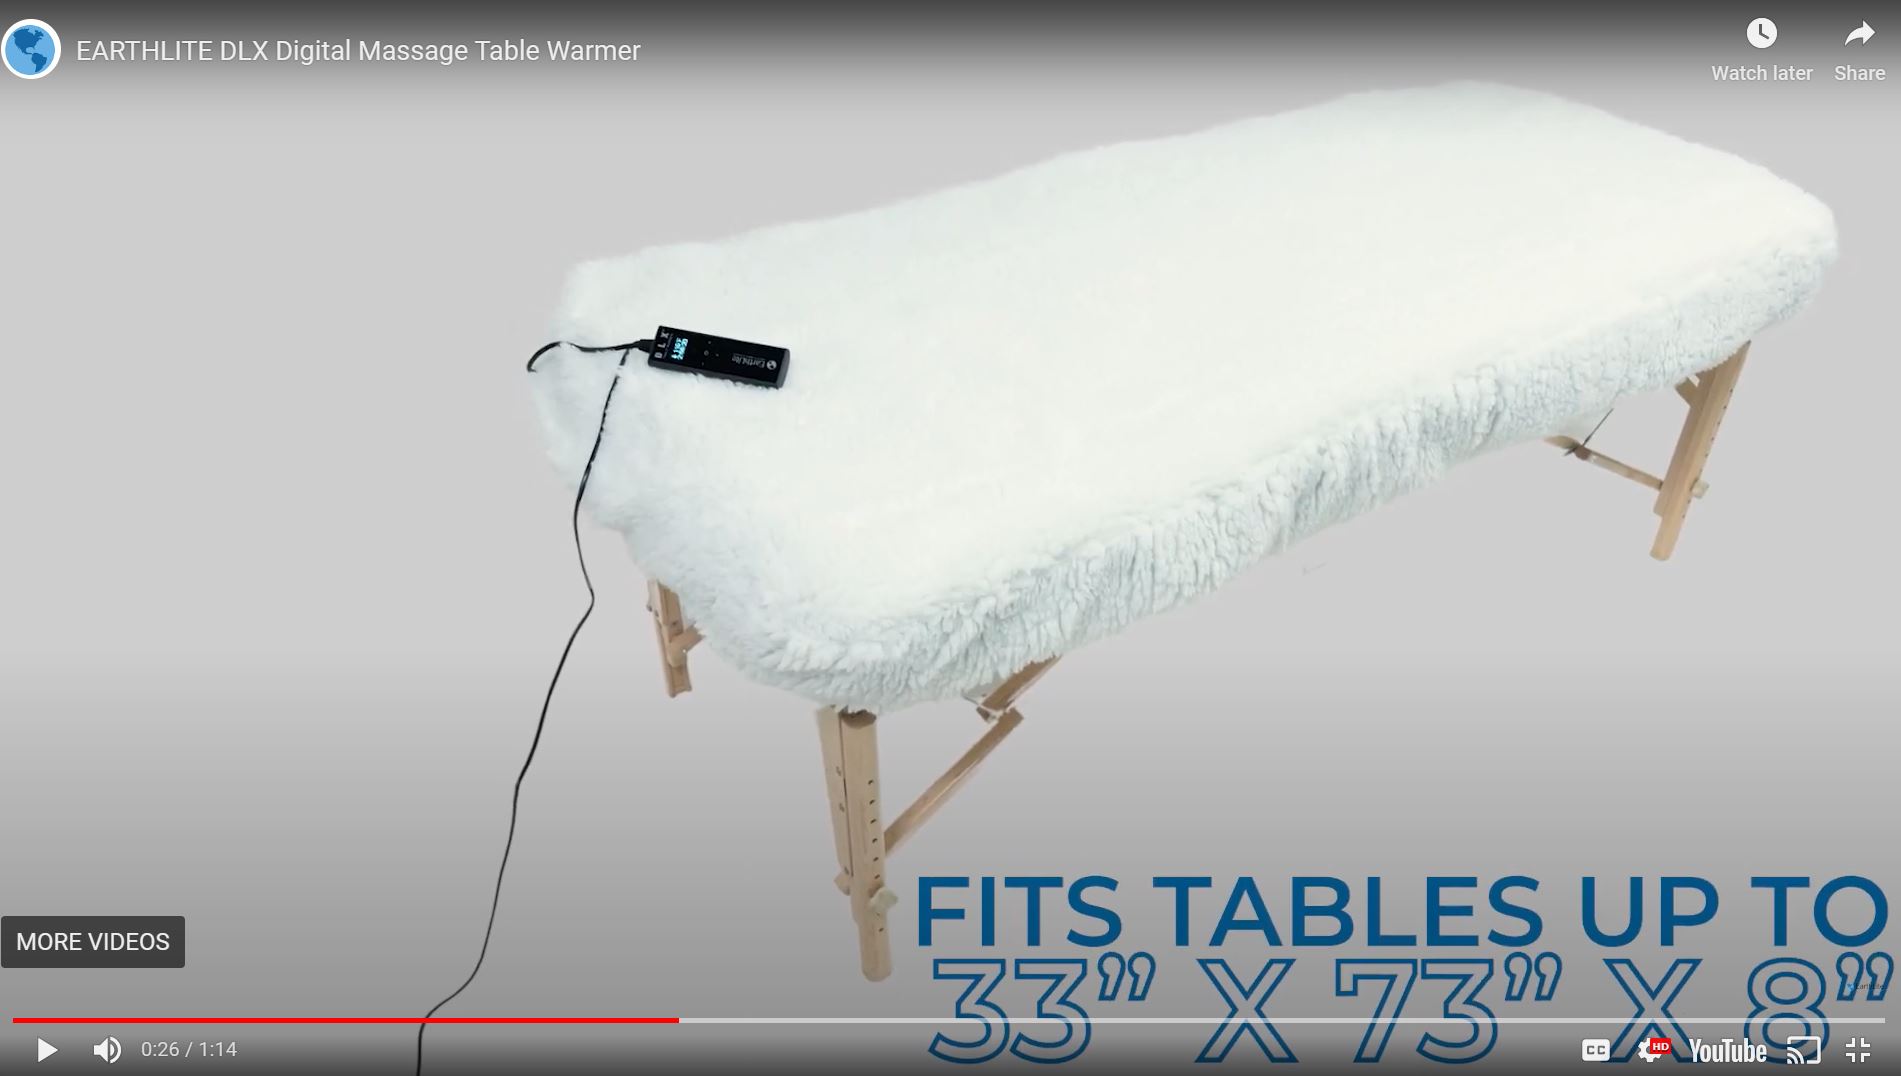 Video showing how to set up and use the Earthlite DLX table warmer.